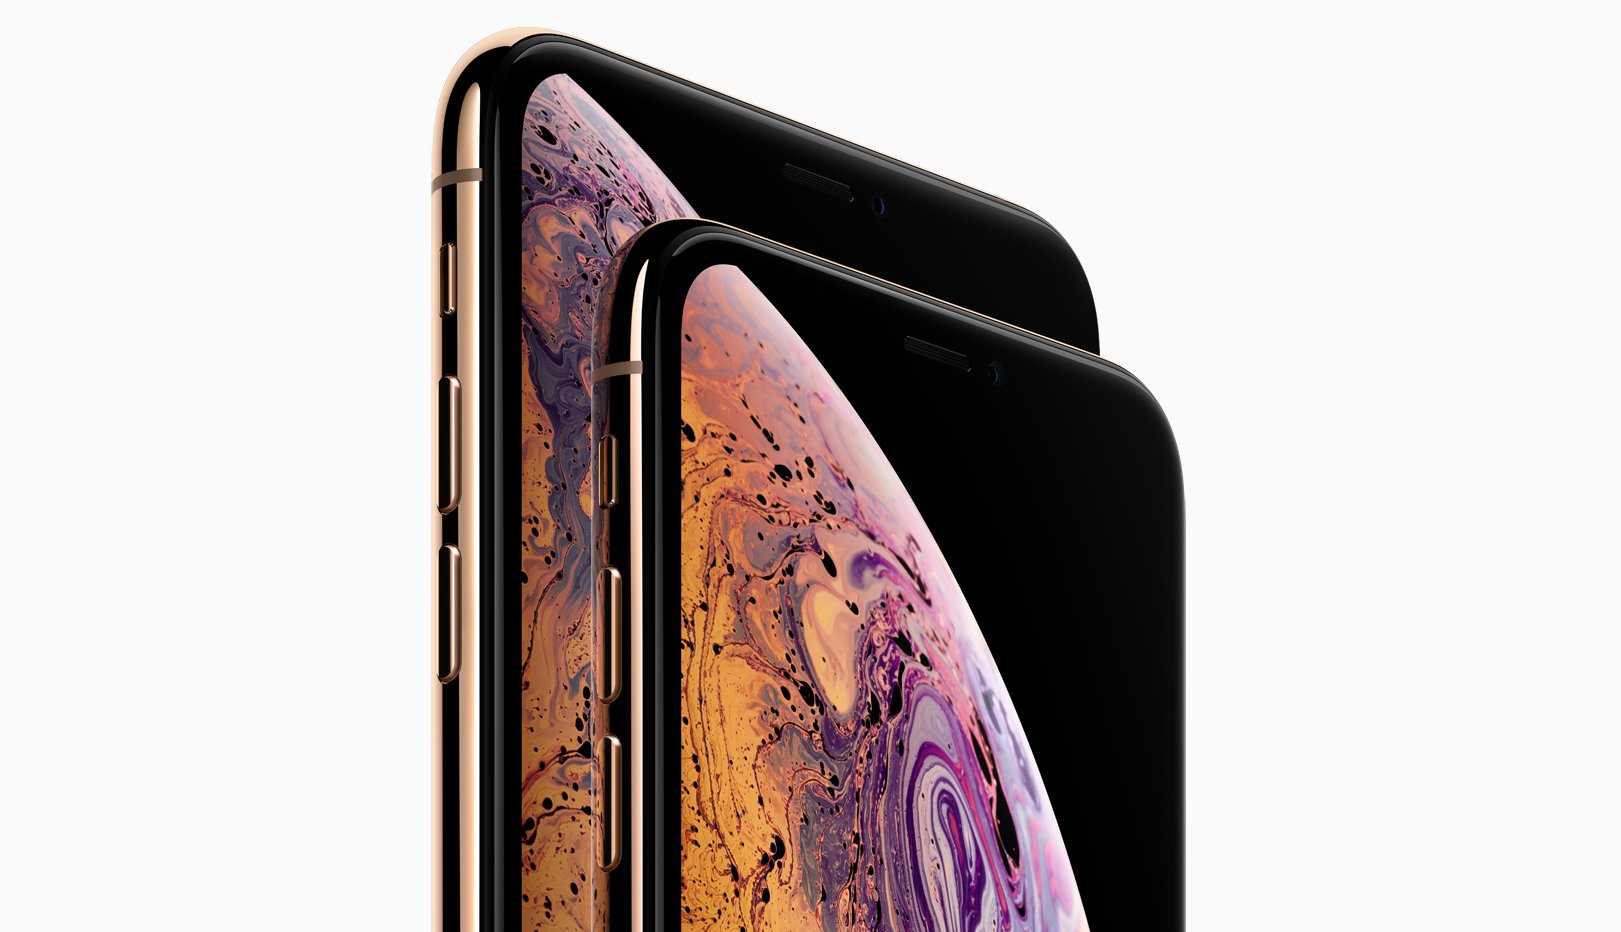 iphone xs max kennenlernen